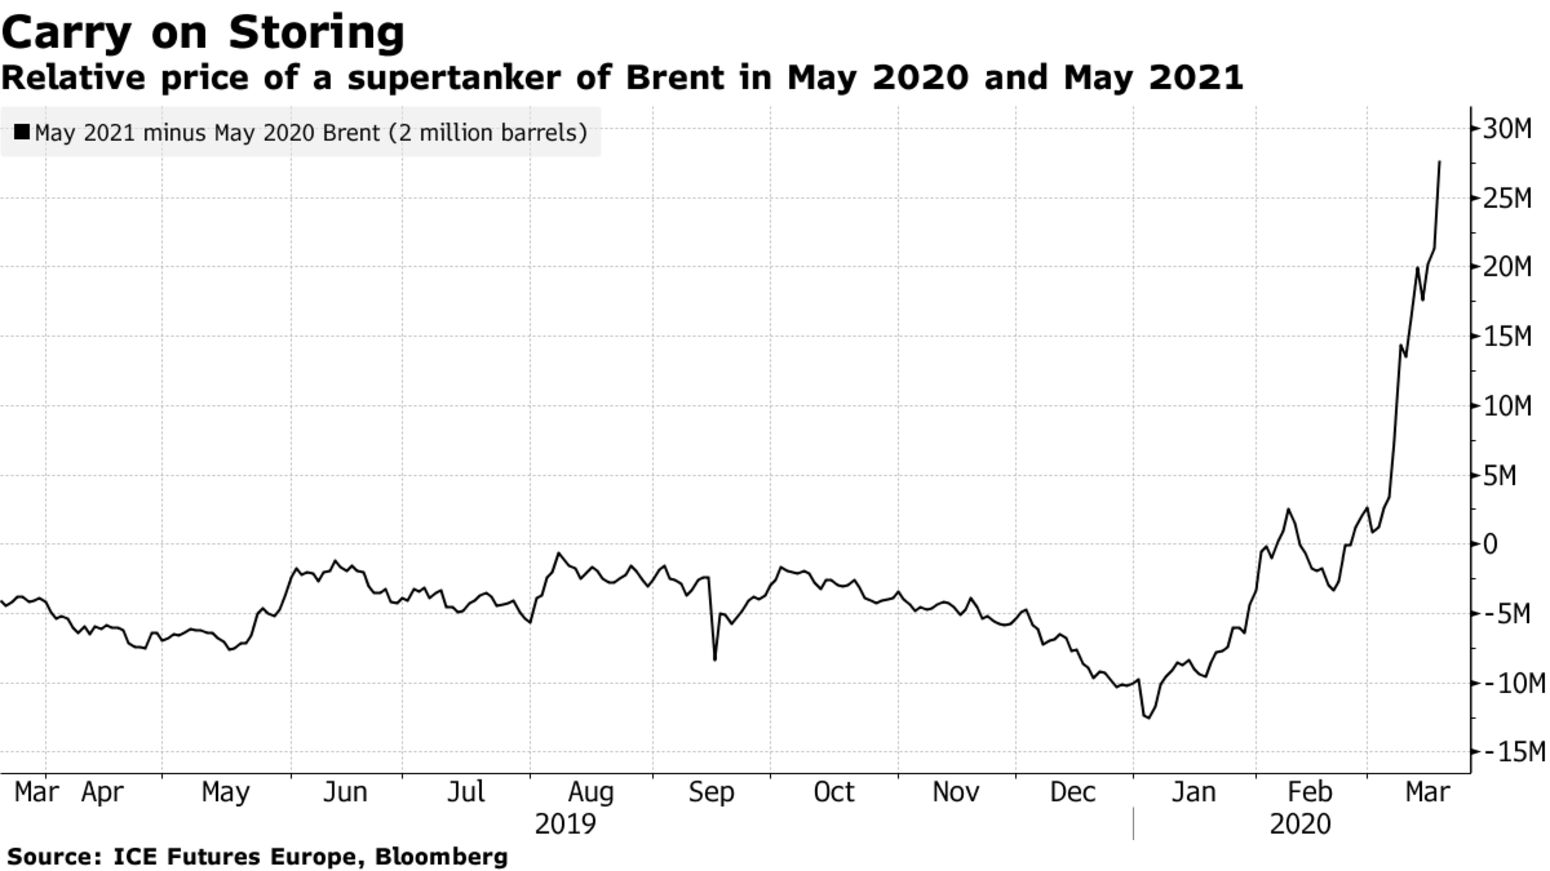 Relative price of a supertanker of Brent in May 2020 and May 2021